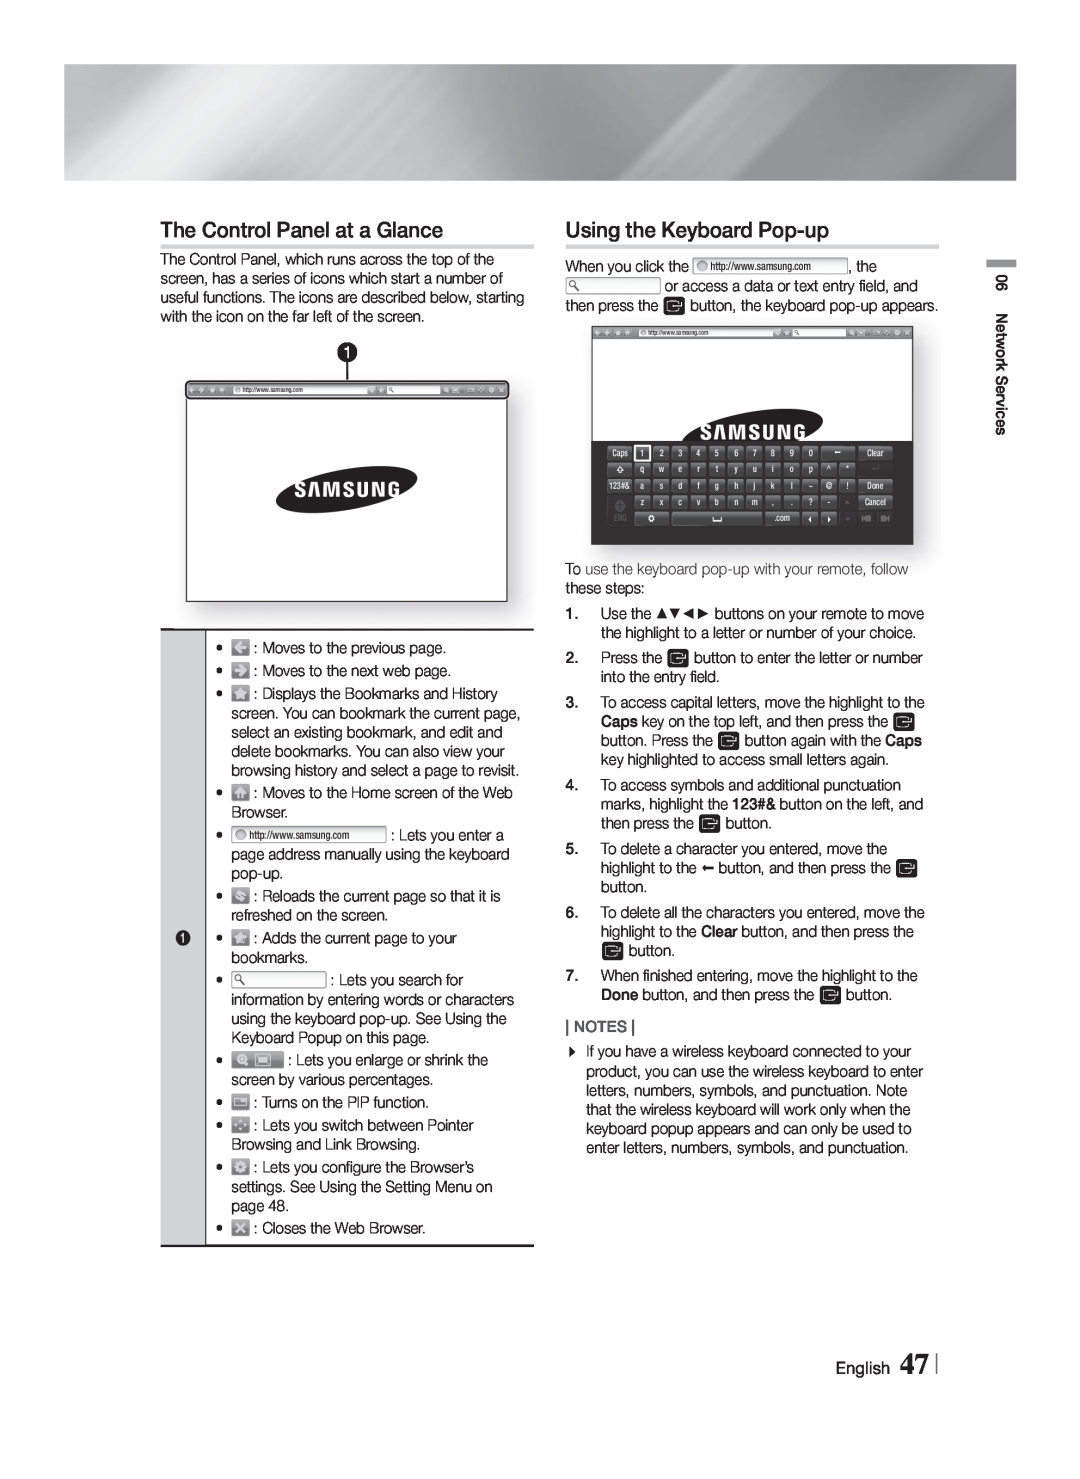 Samsung HTF5500WZA, HT-F5500W user manual The Control Panel at a Glance, Using the Keyboard Pop-up, English, Notes 